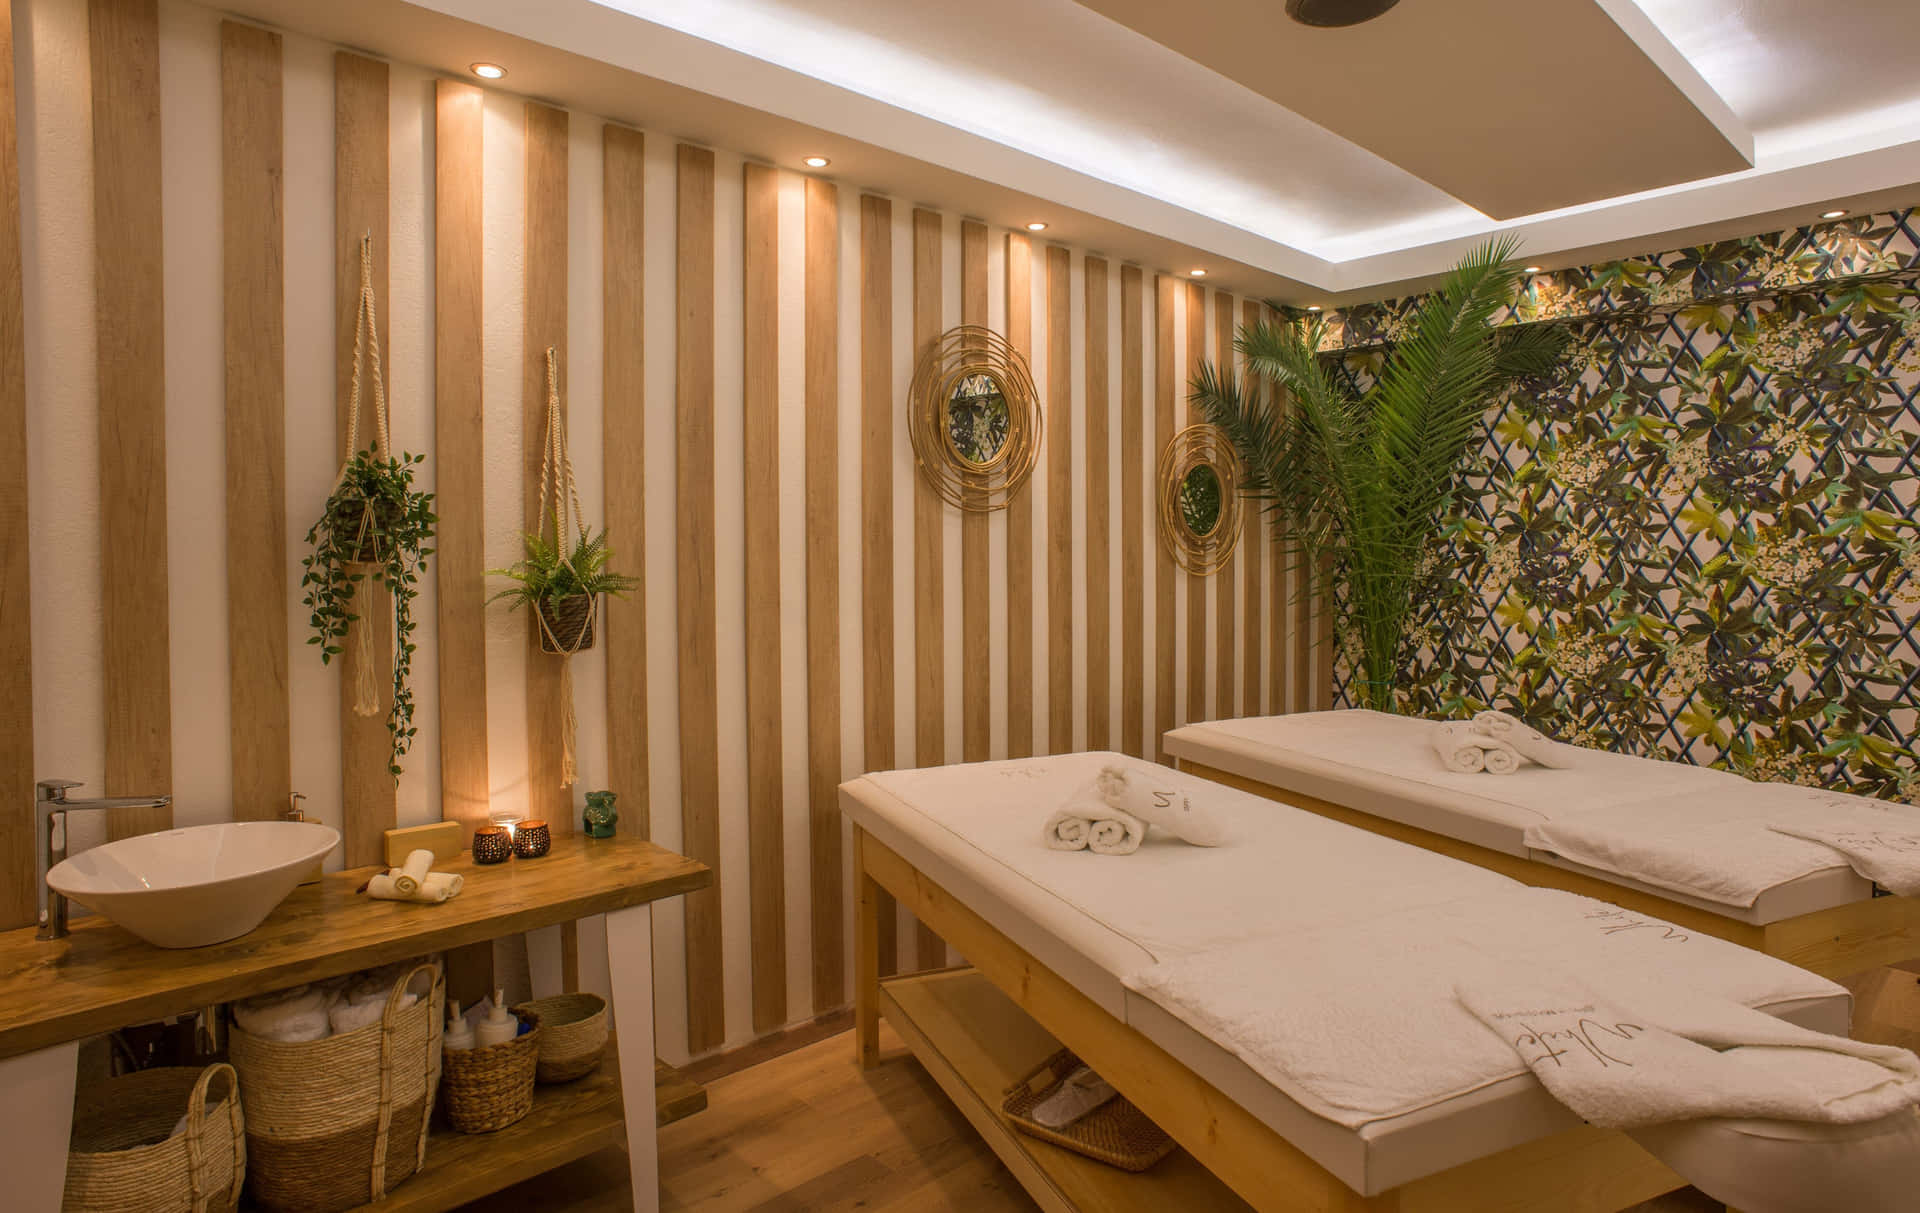 Find ultimate relaxation in this tranquil massage room.